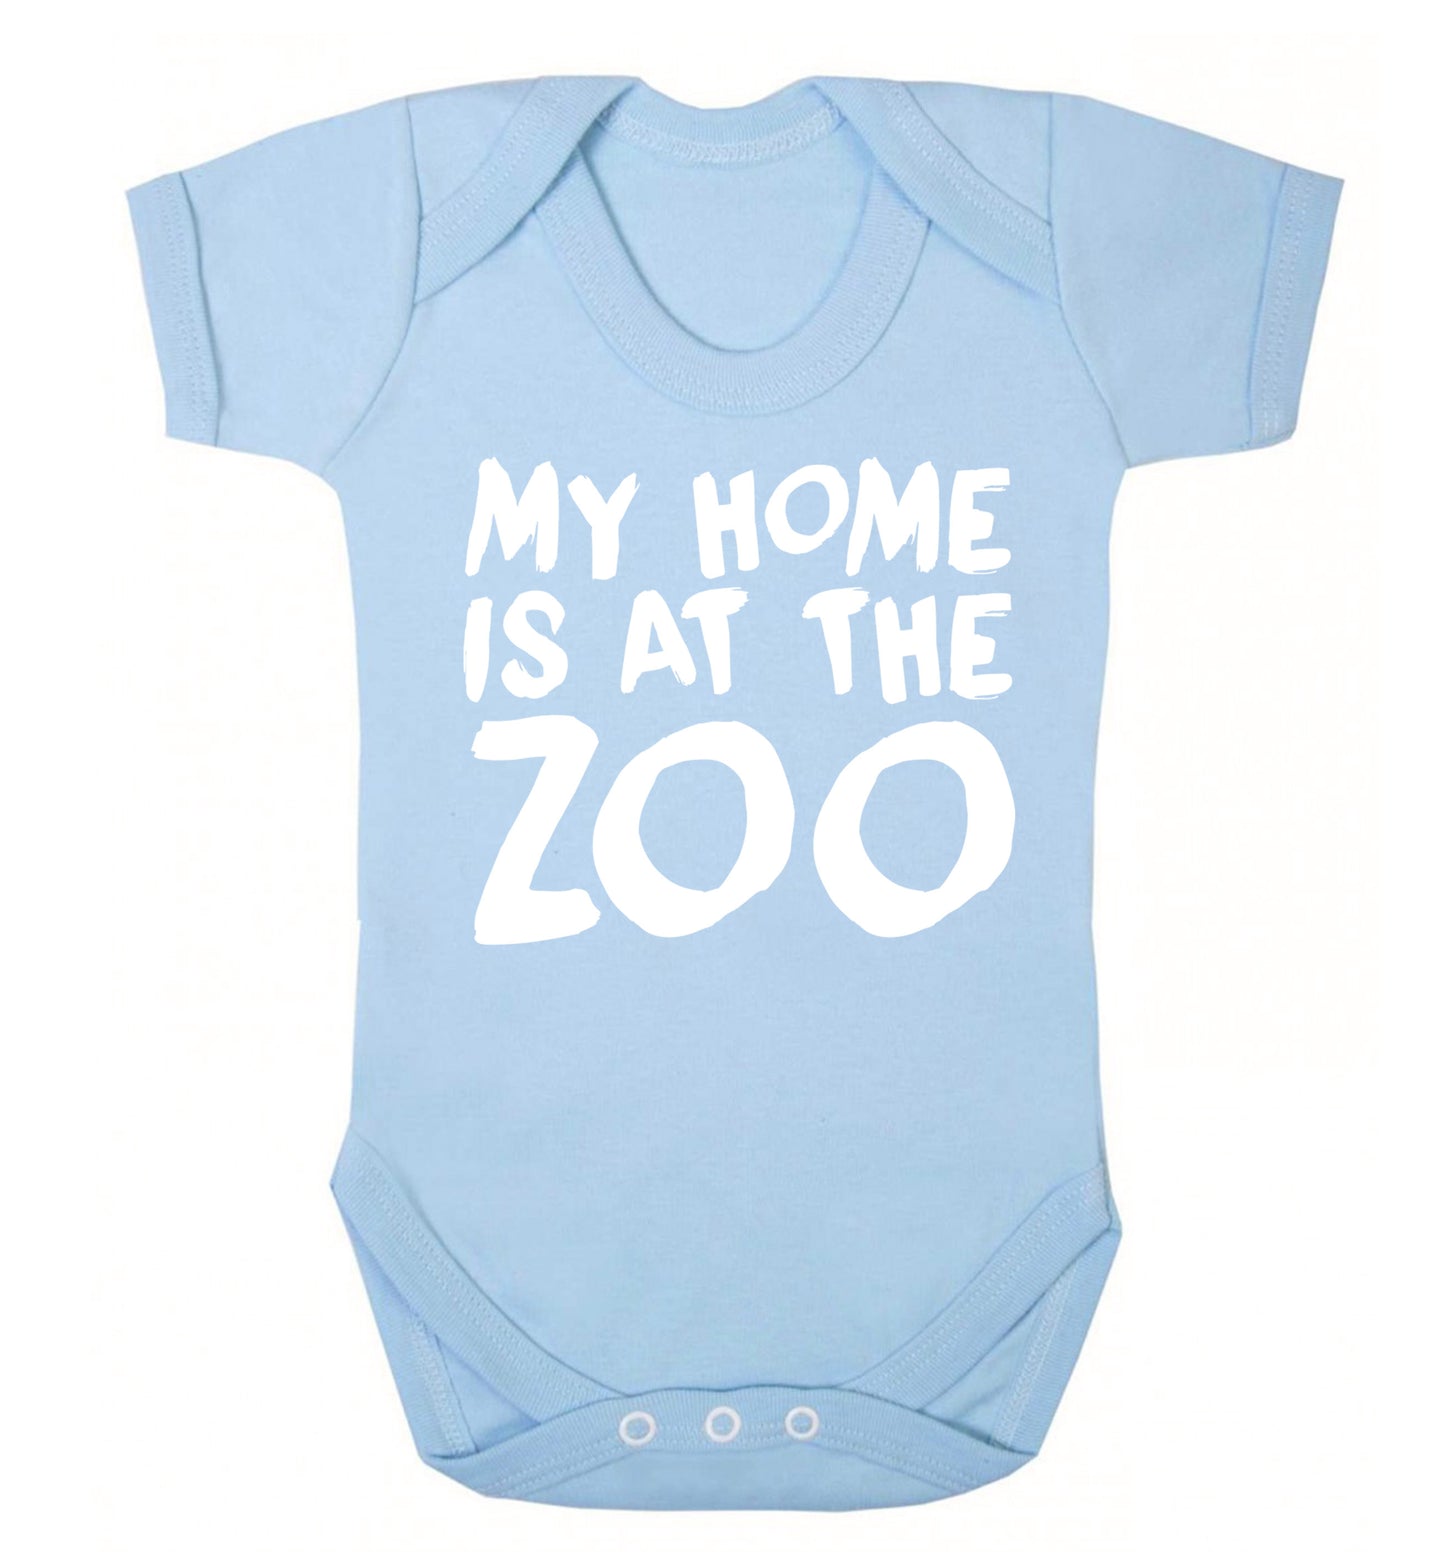 My home is at the zoo Baby Vest pale blue 18-24 months